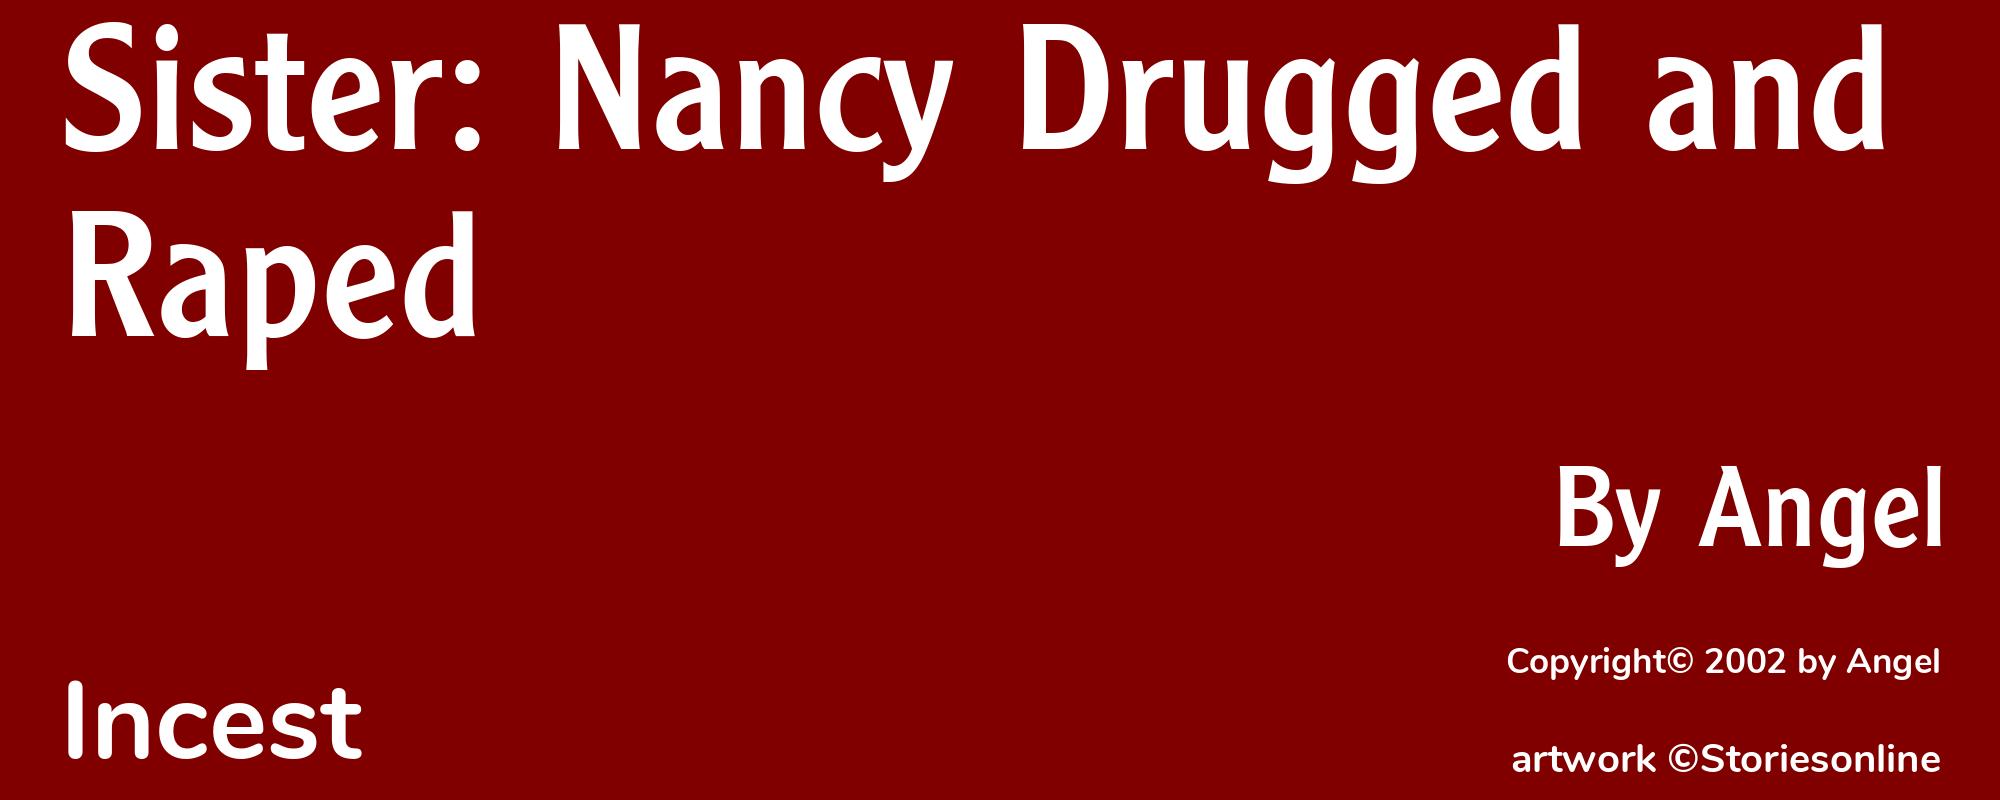 Sister: Nancy Drugged and Raped - Cover